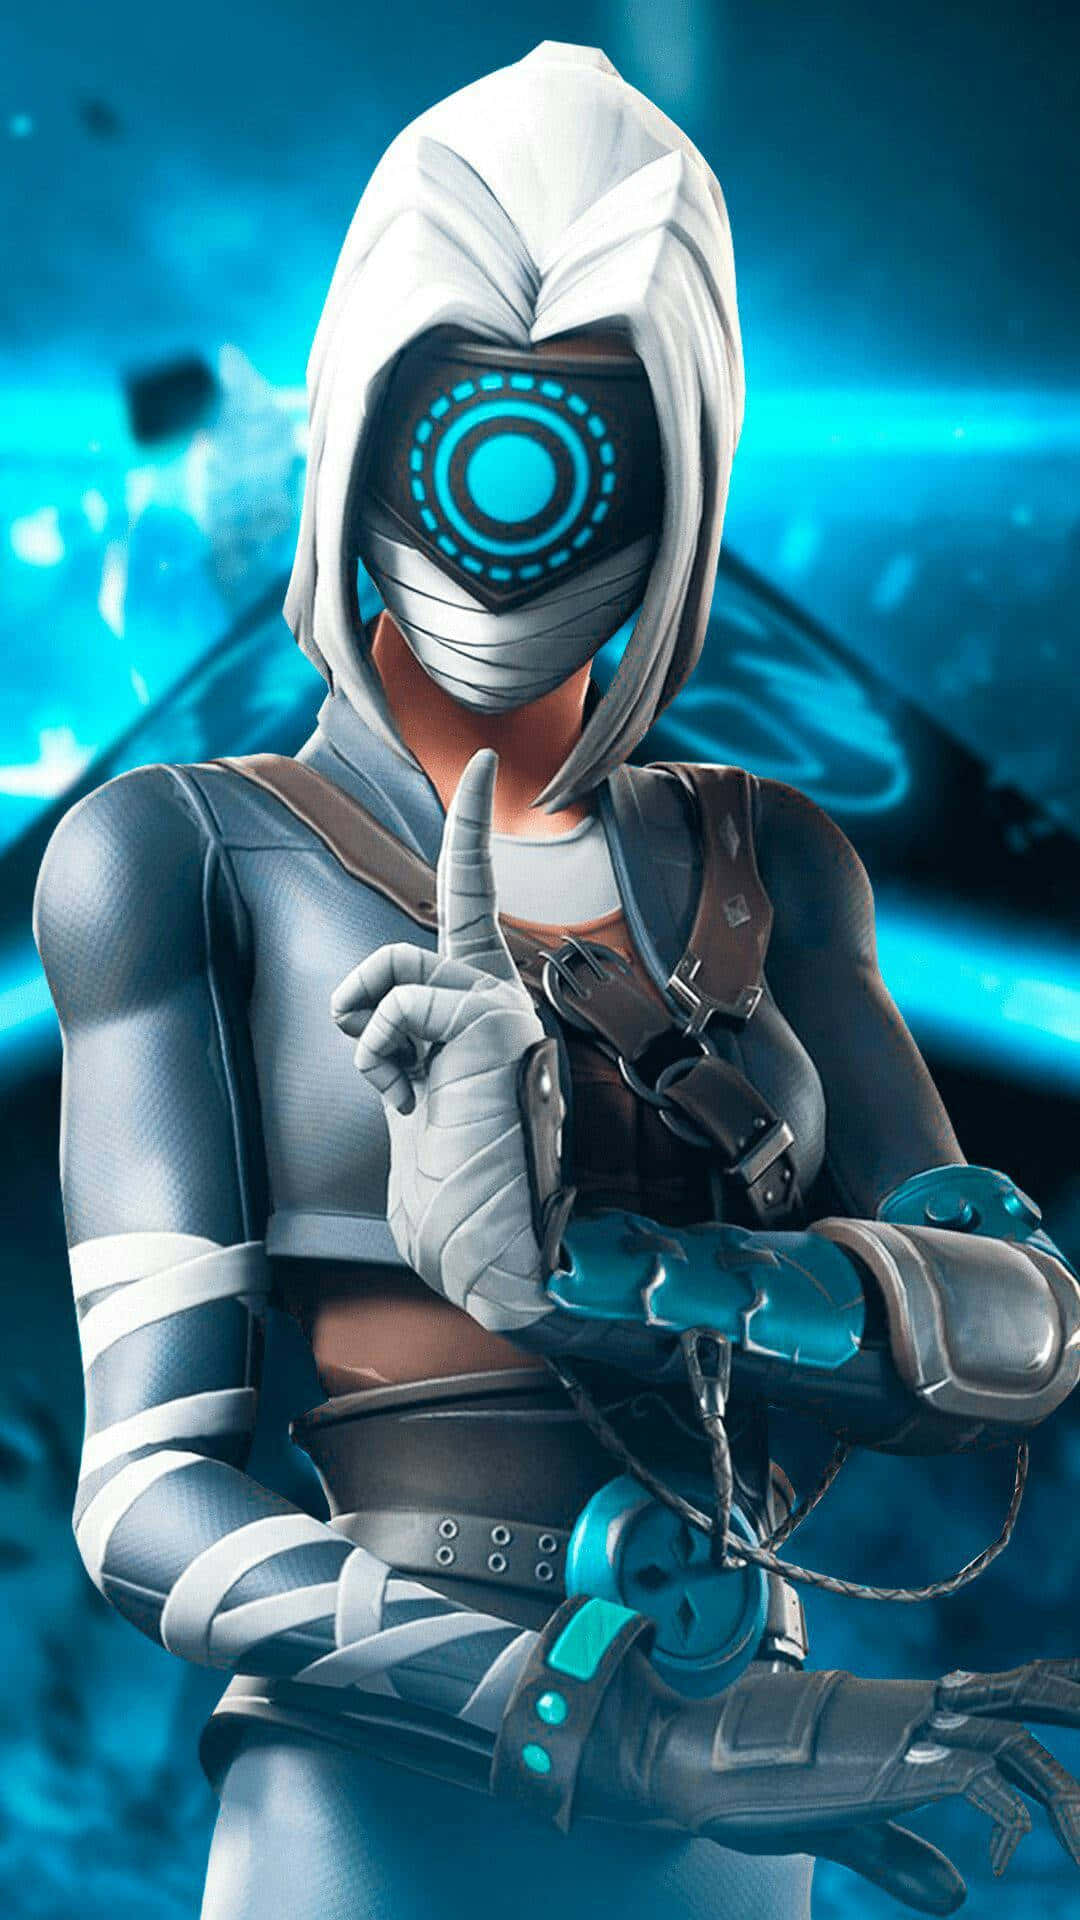 Download Impress Your Friends With An Awesome Fortnite Profile Picture